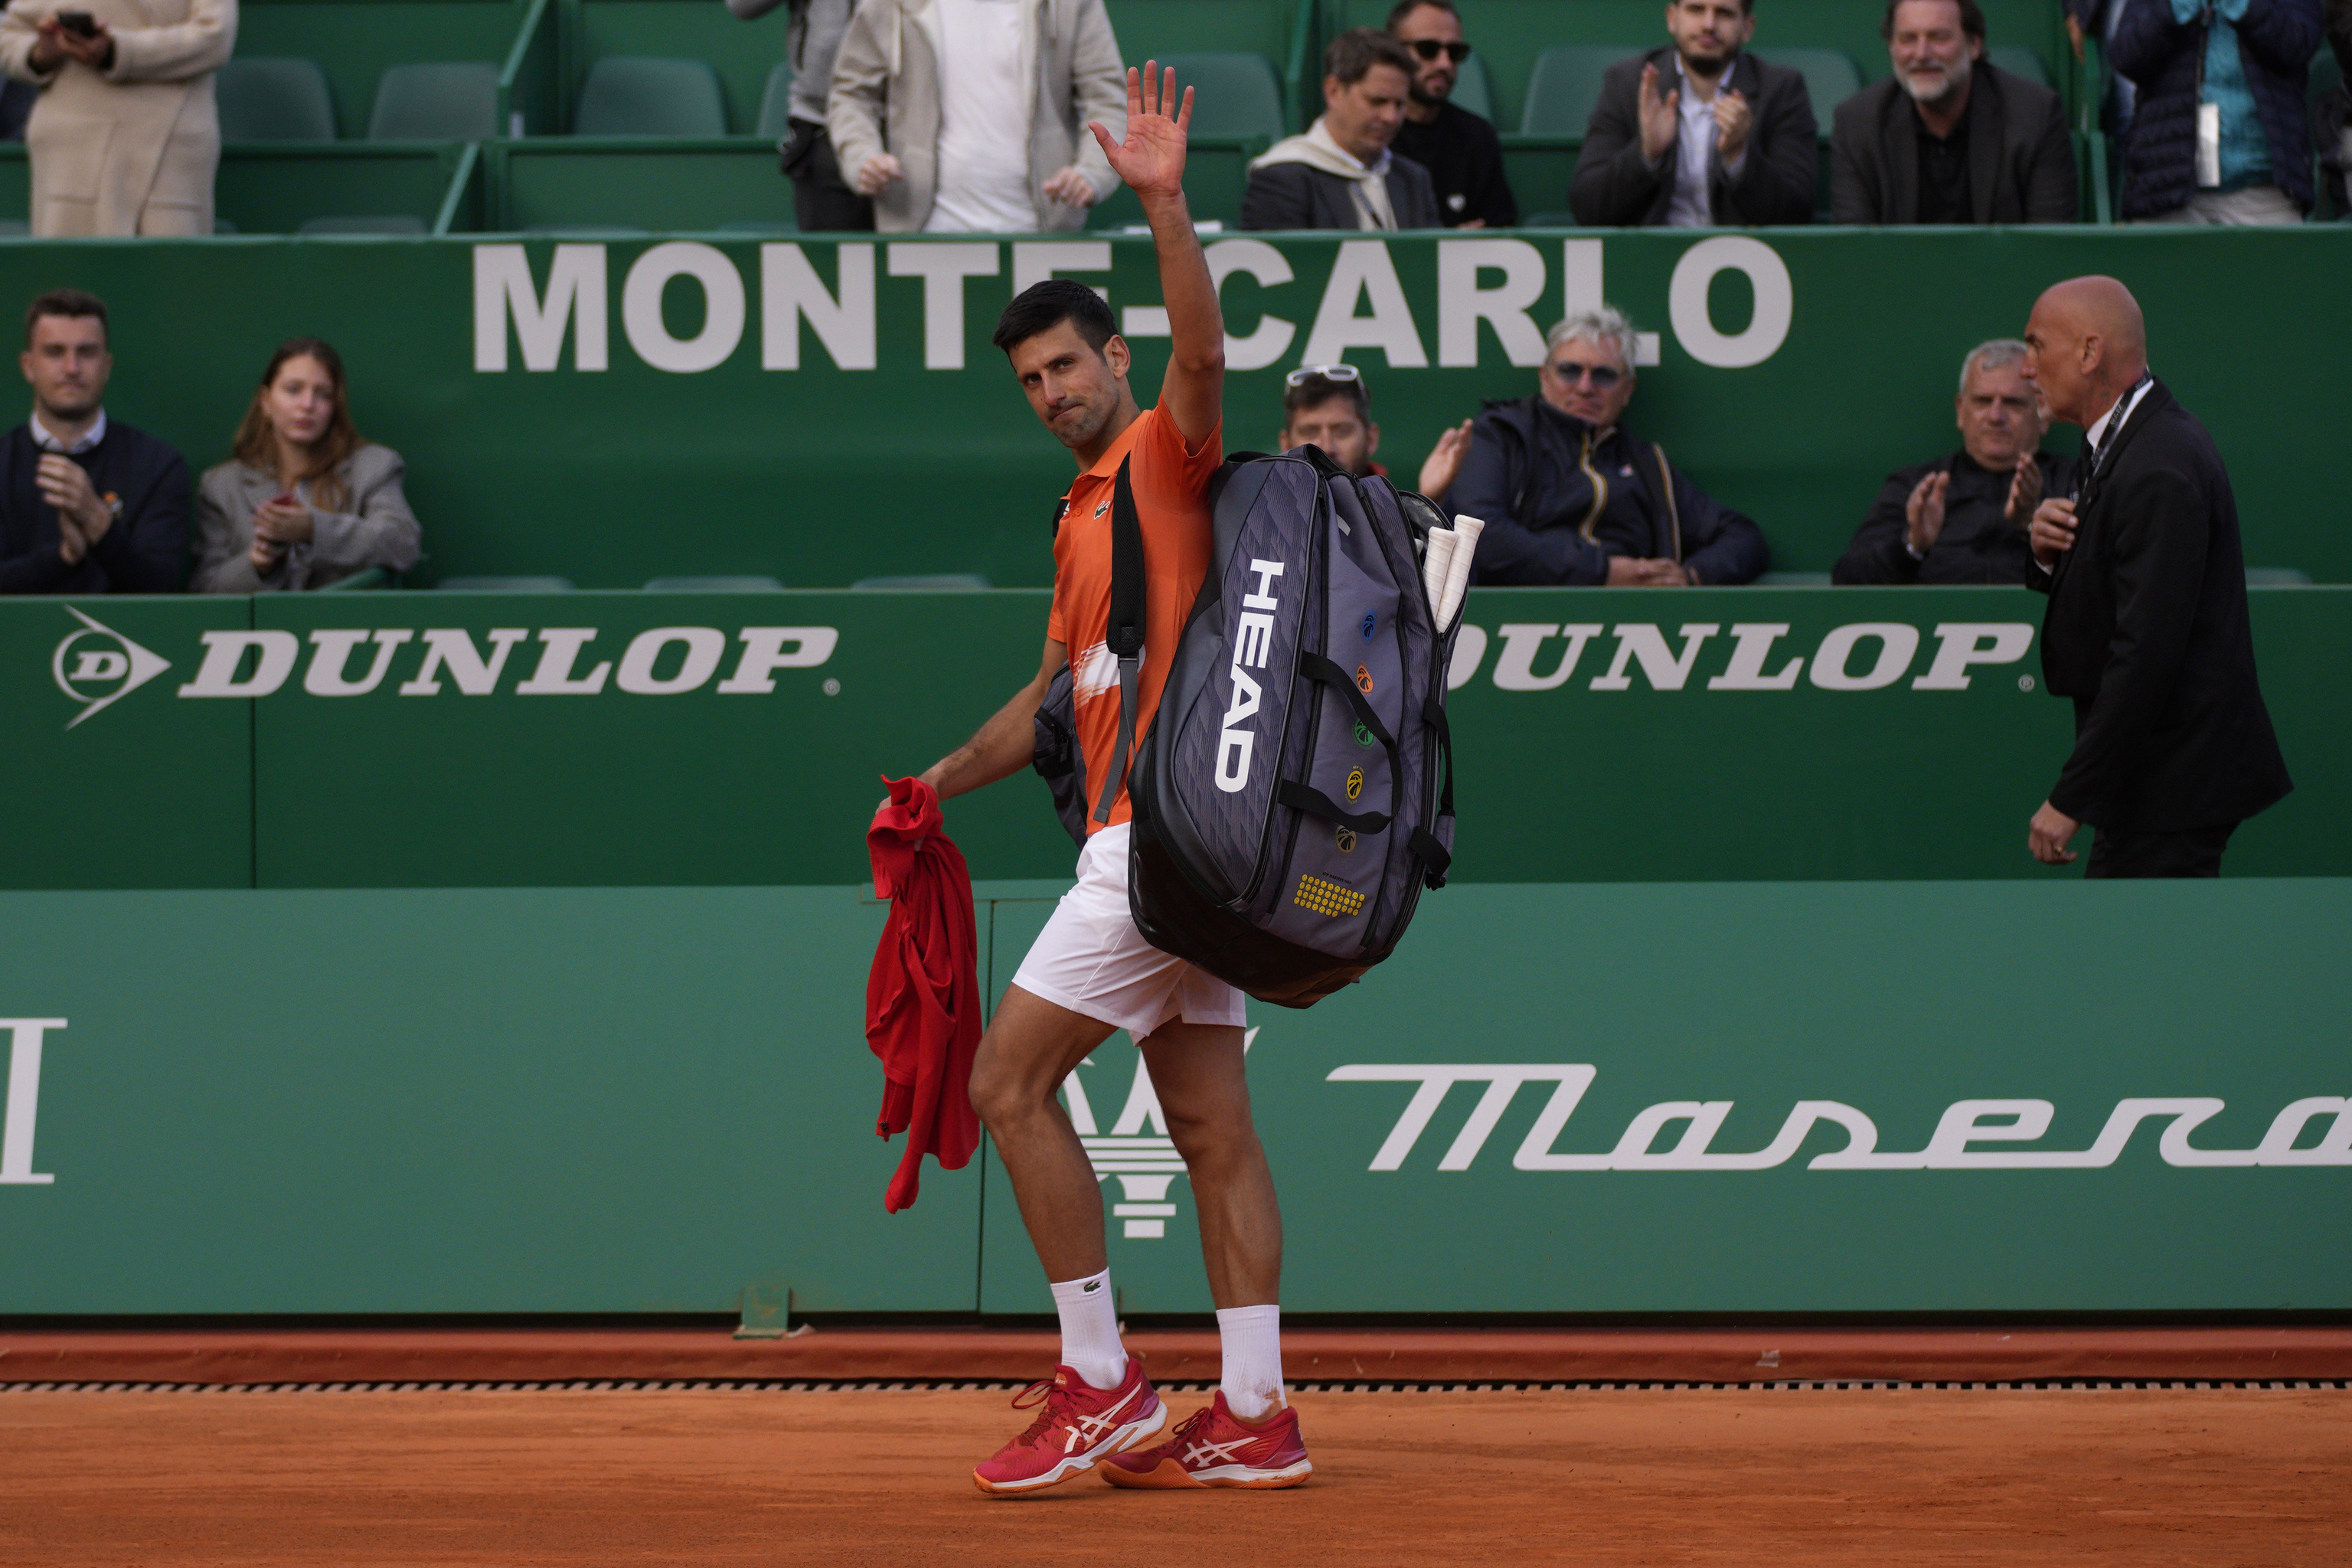 Djokovic was knocked out of the court after losing to Davidovich in Monte Carlo.